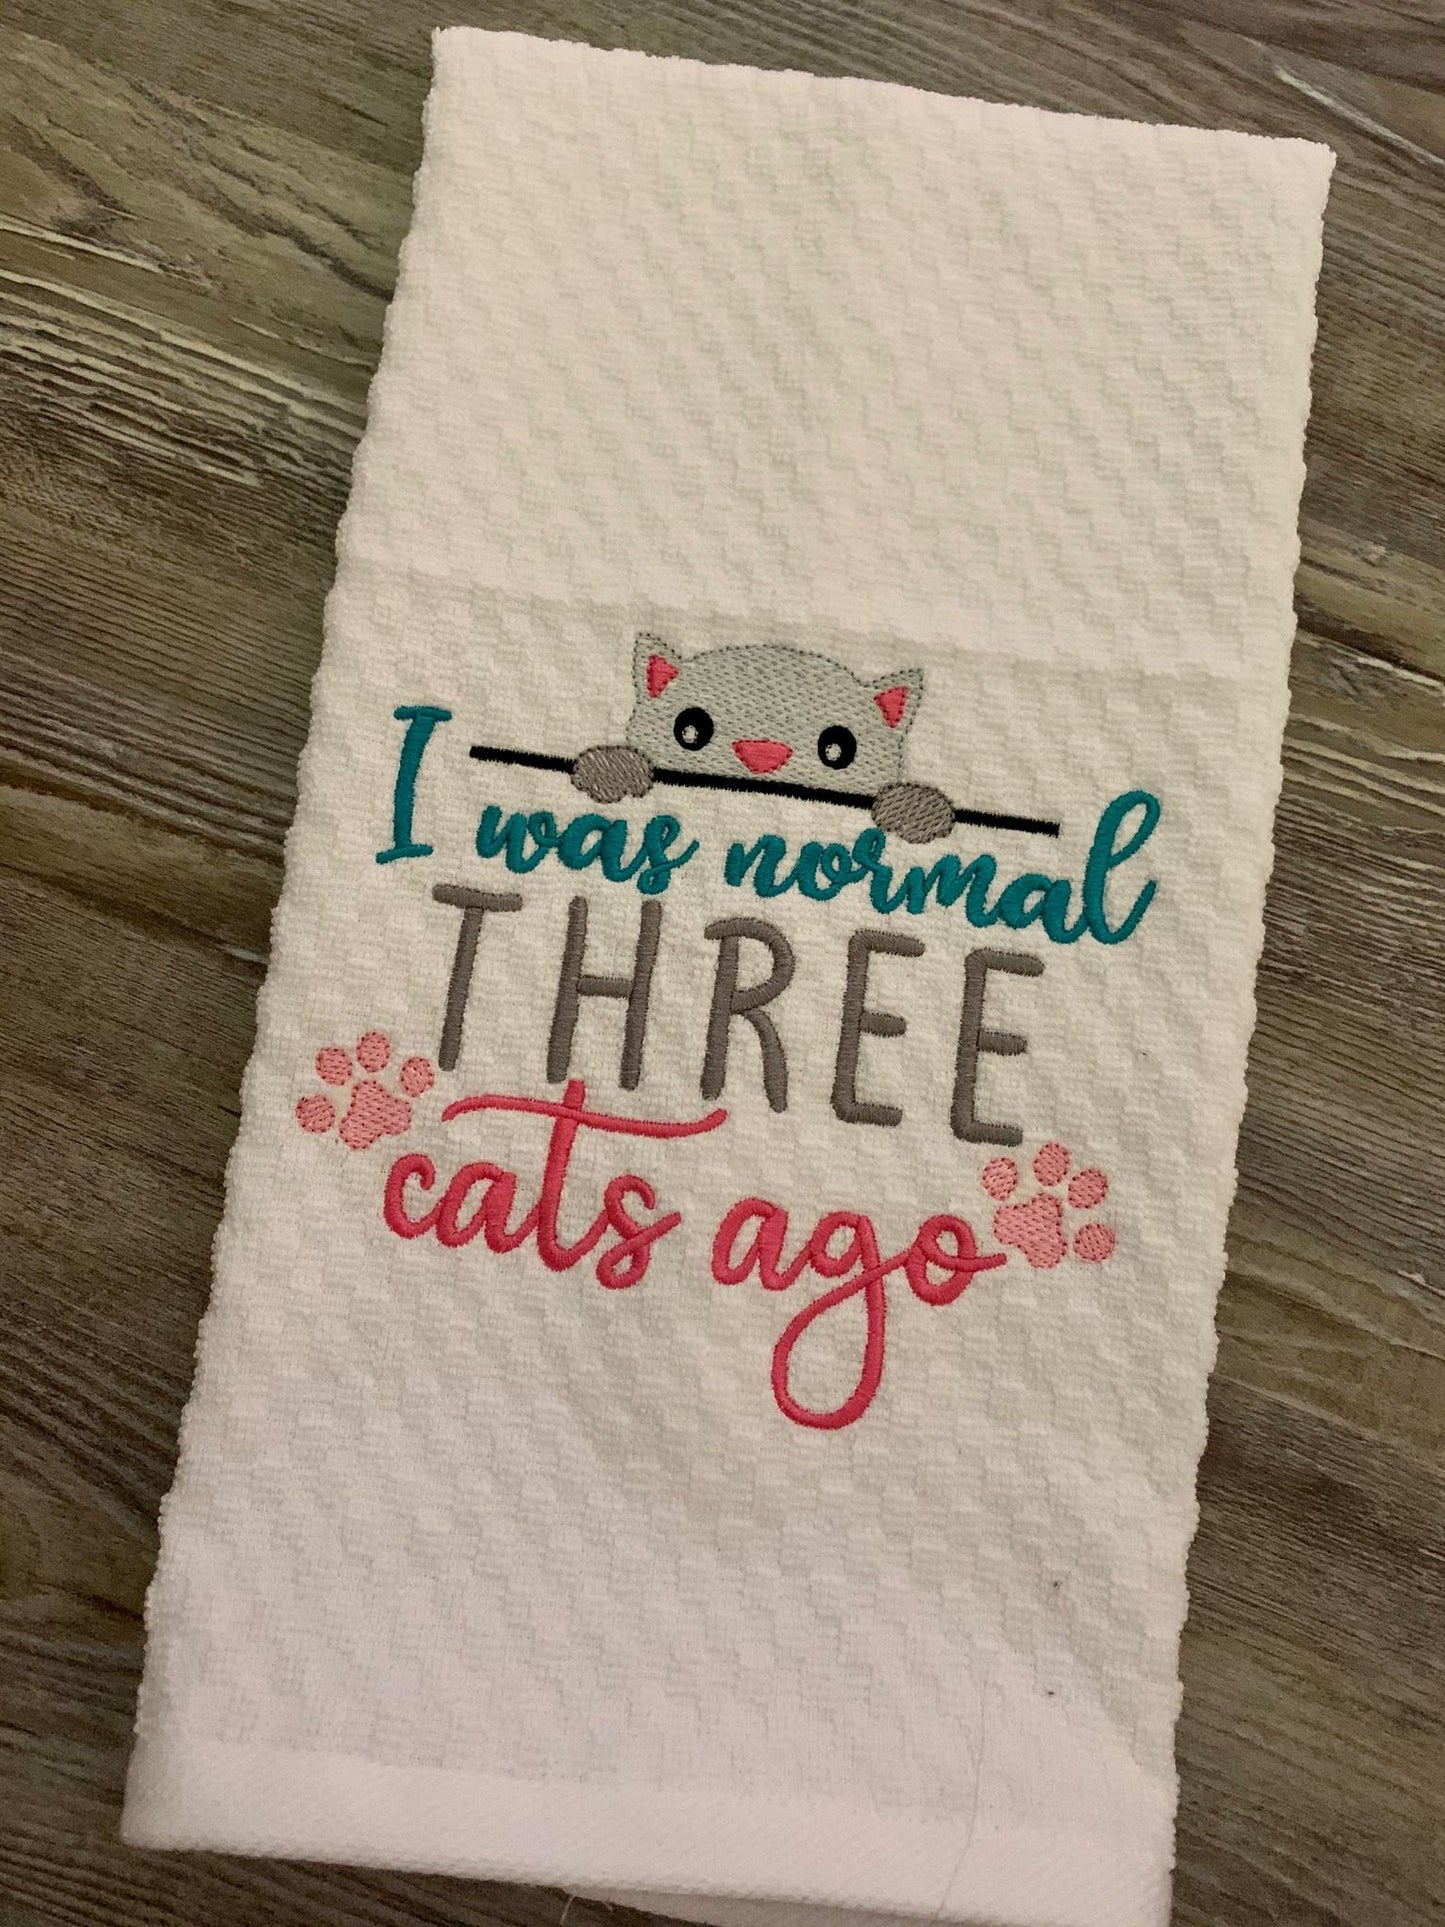 I was Normal 3 Cats Ago - 2 Sizes - Digital Embroidery Design